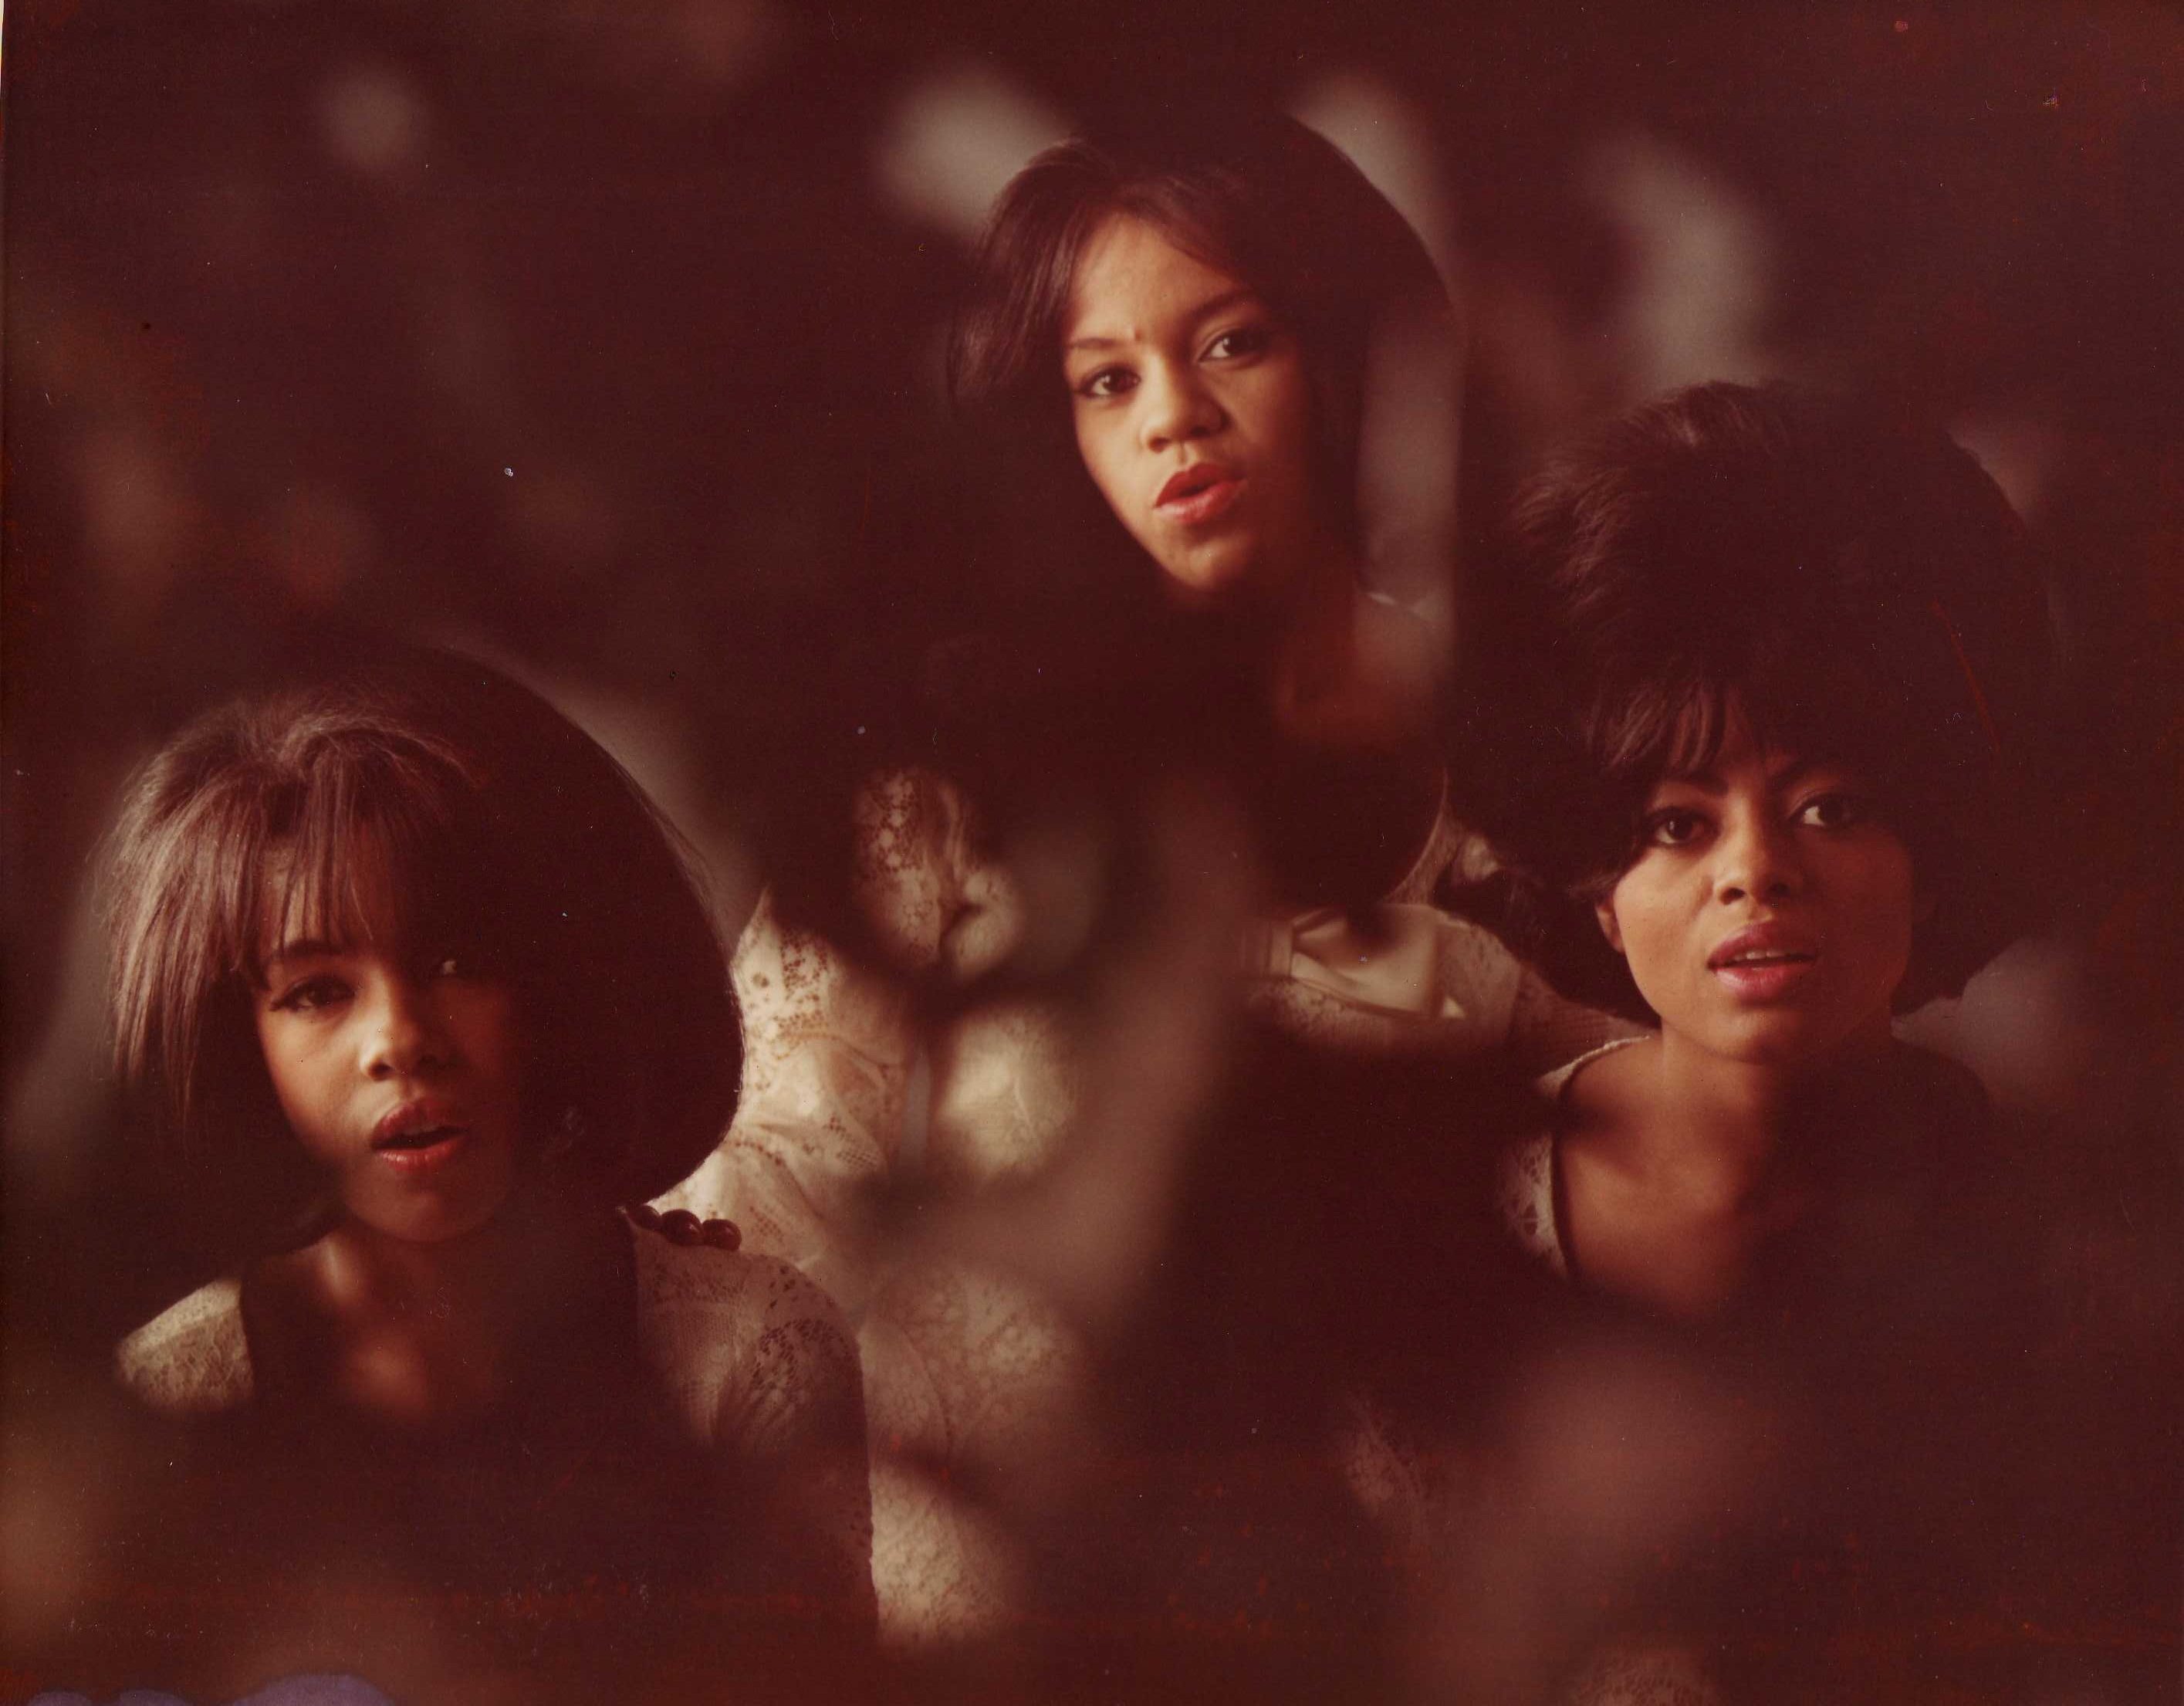 Diana Ross & The Supremes with something in front of the lens